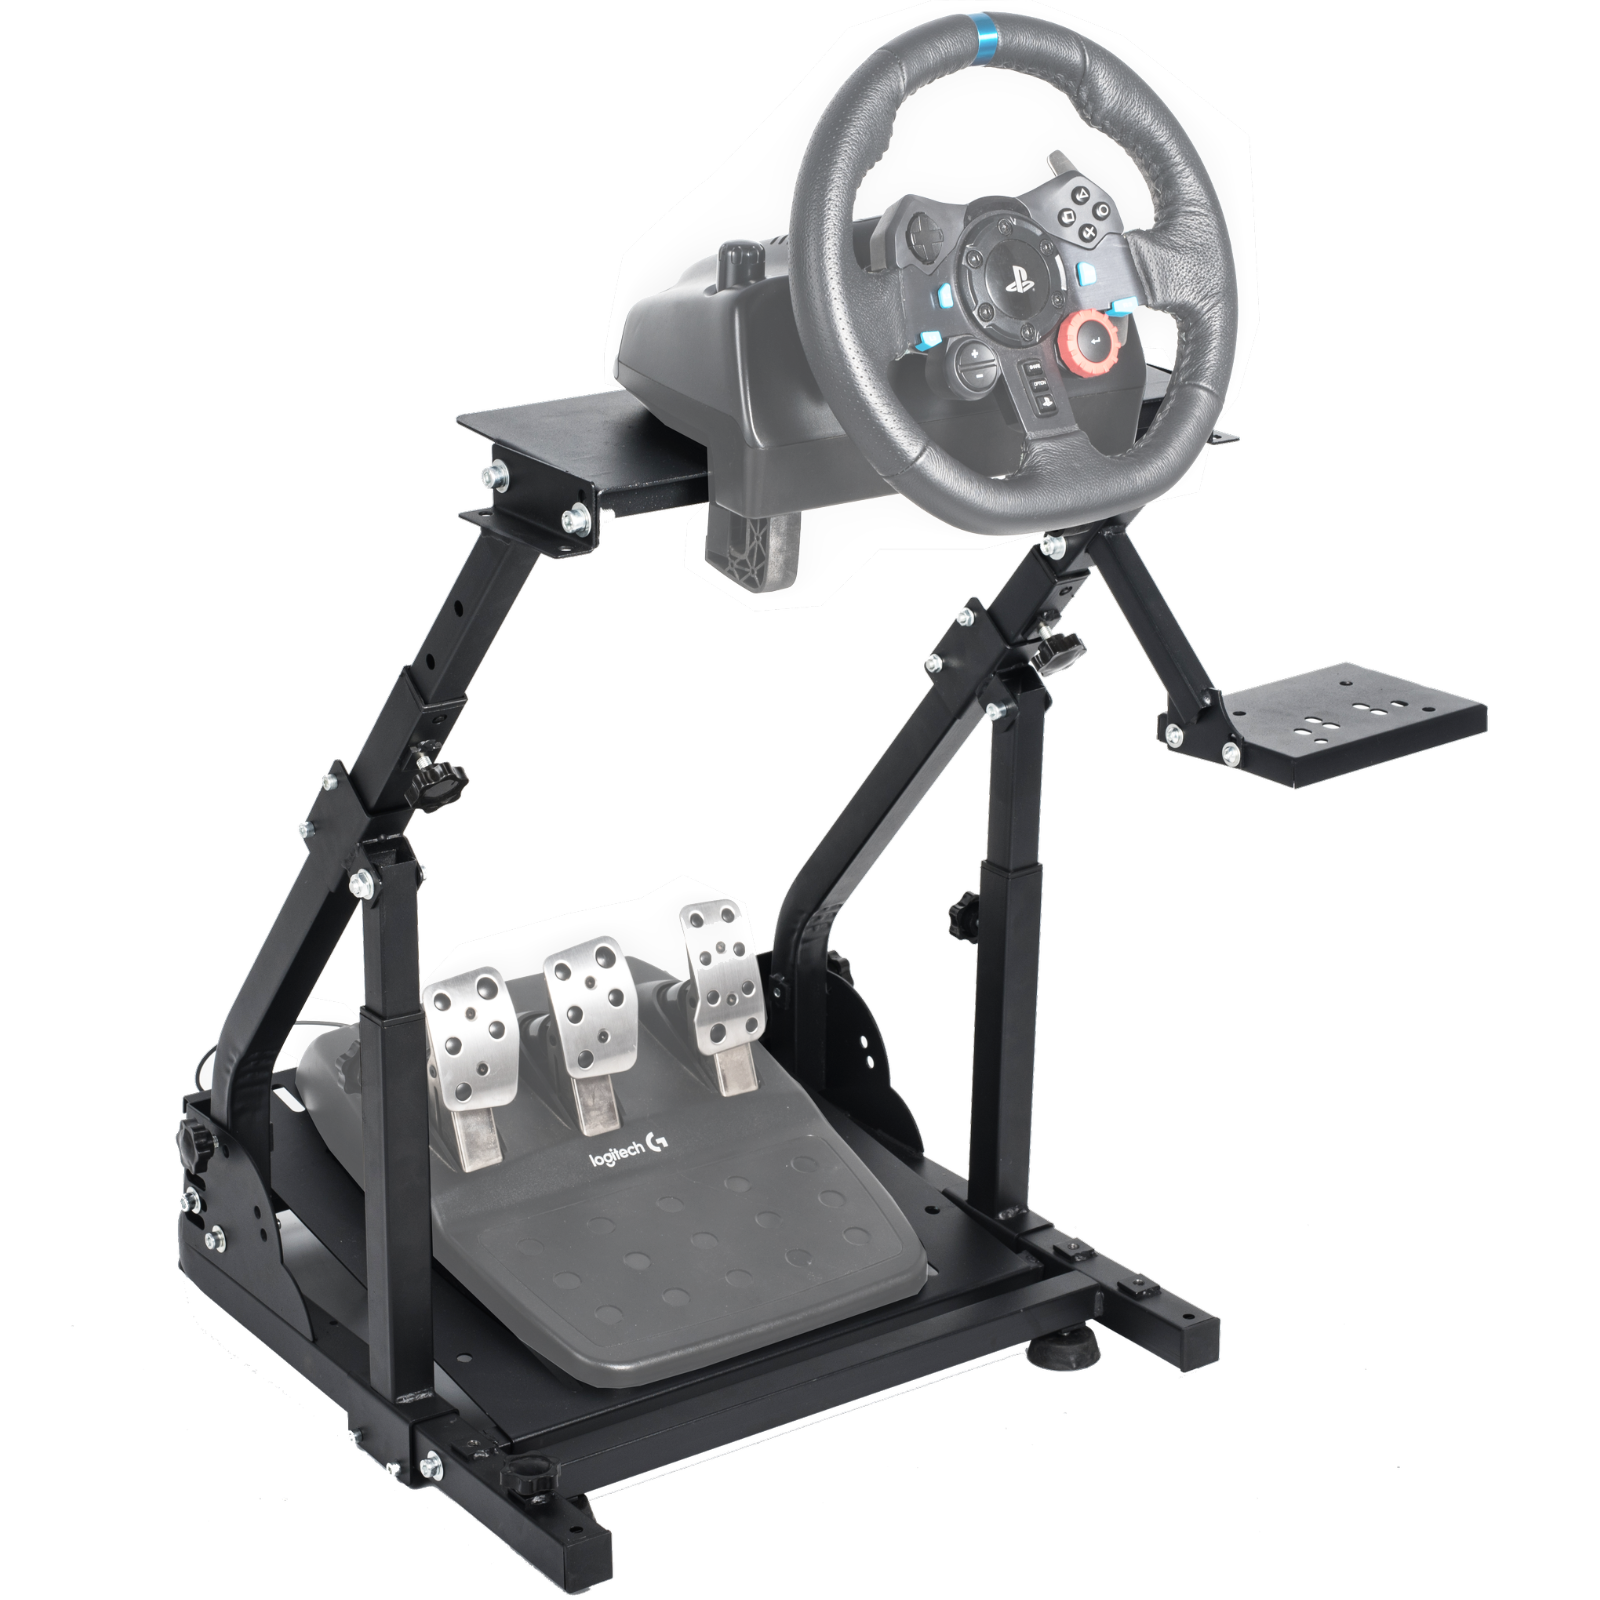 Minneer Stable Racing Wheel Stand with Double Support Arms Fit Logitech Moza R5